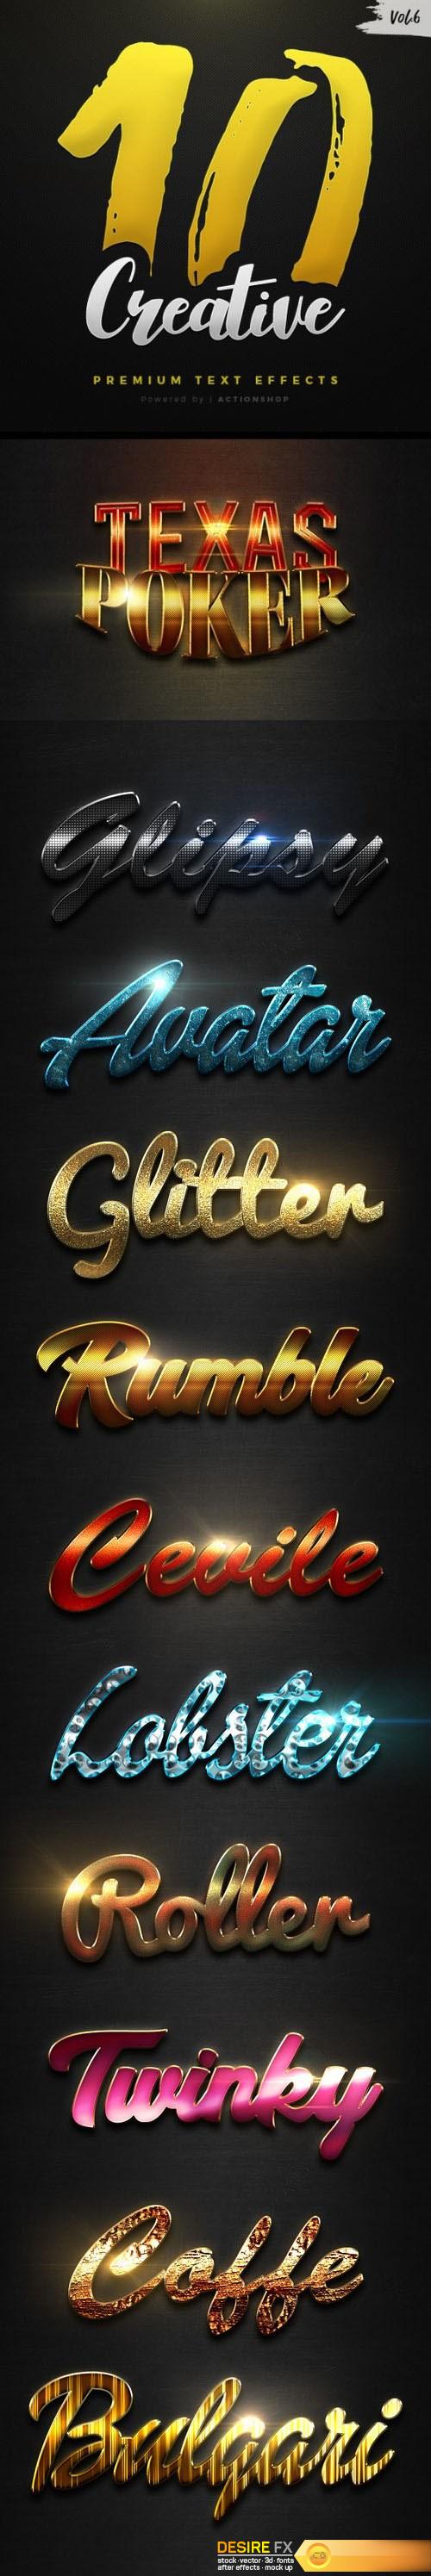 graphicriver-21038220-10-creative-text-effects-vol6